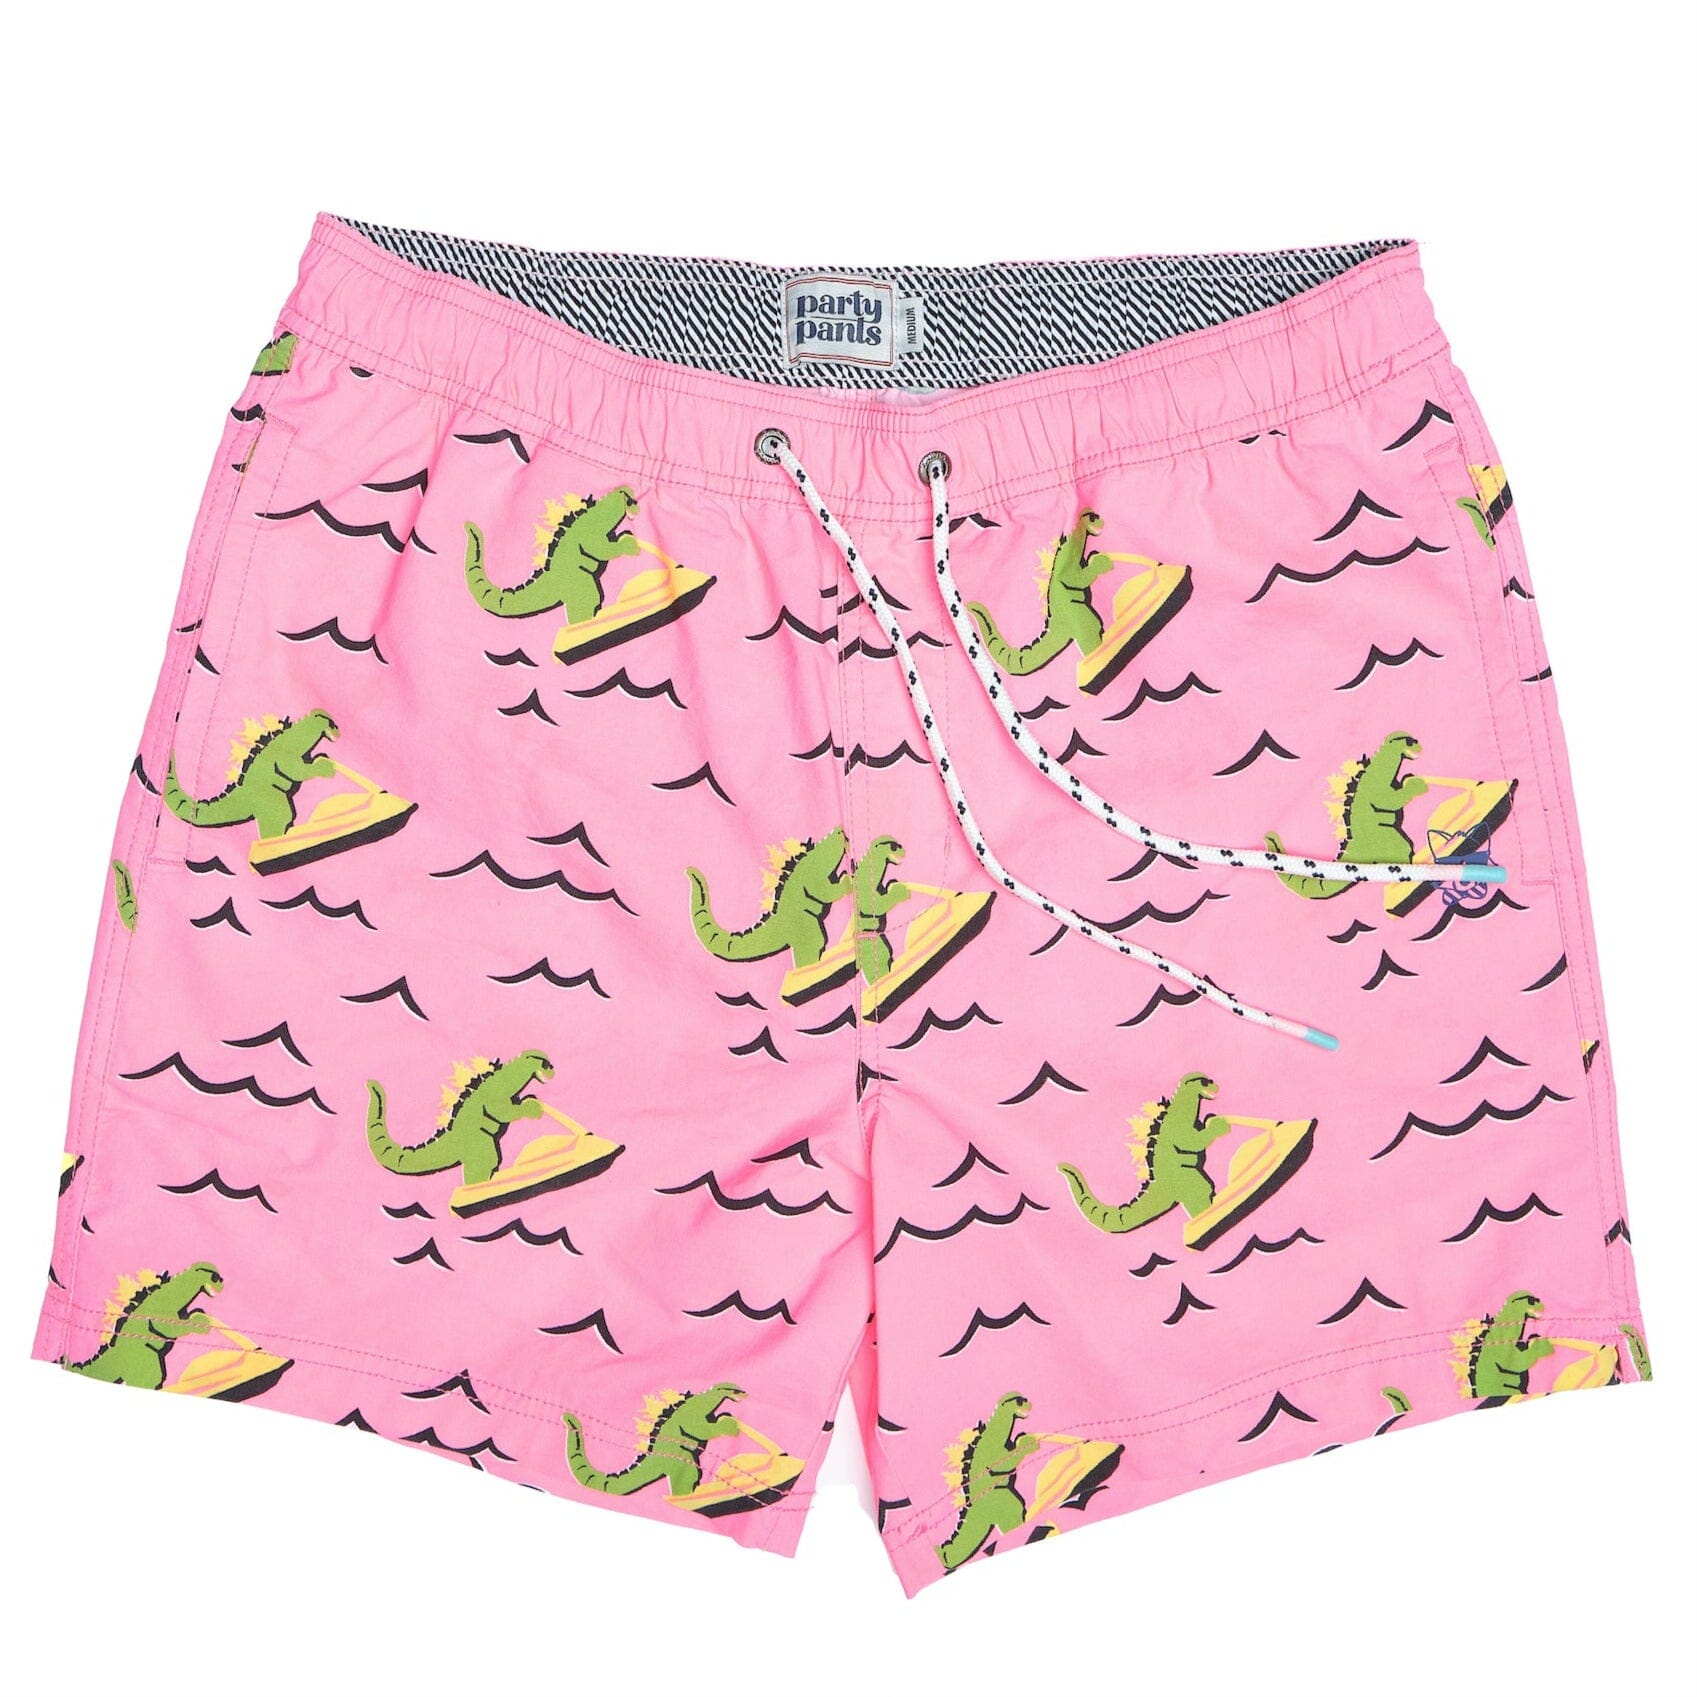 DINO RIPPER PARTY STARTER SHORT - PINK SALE SHORTS PARTY PANTS 